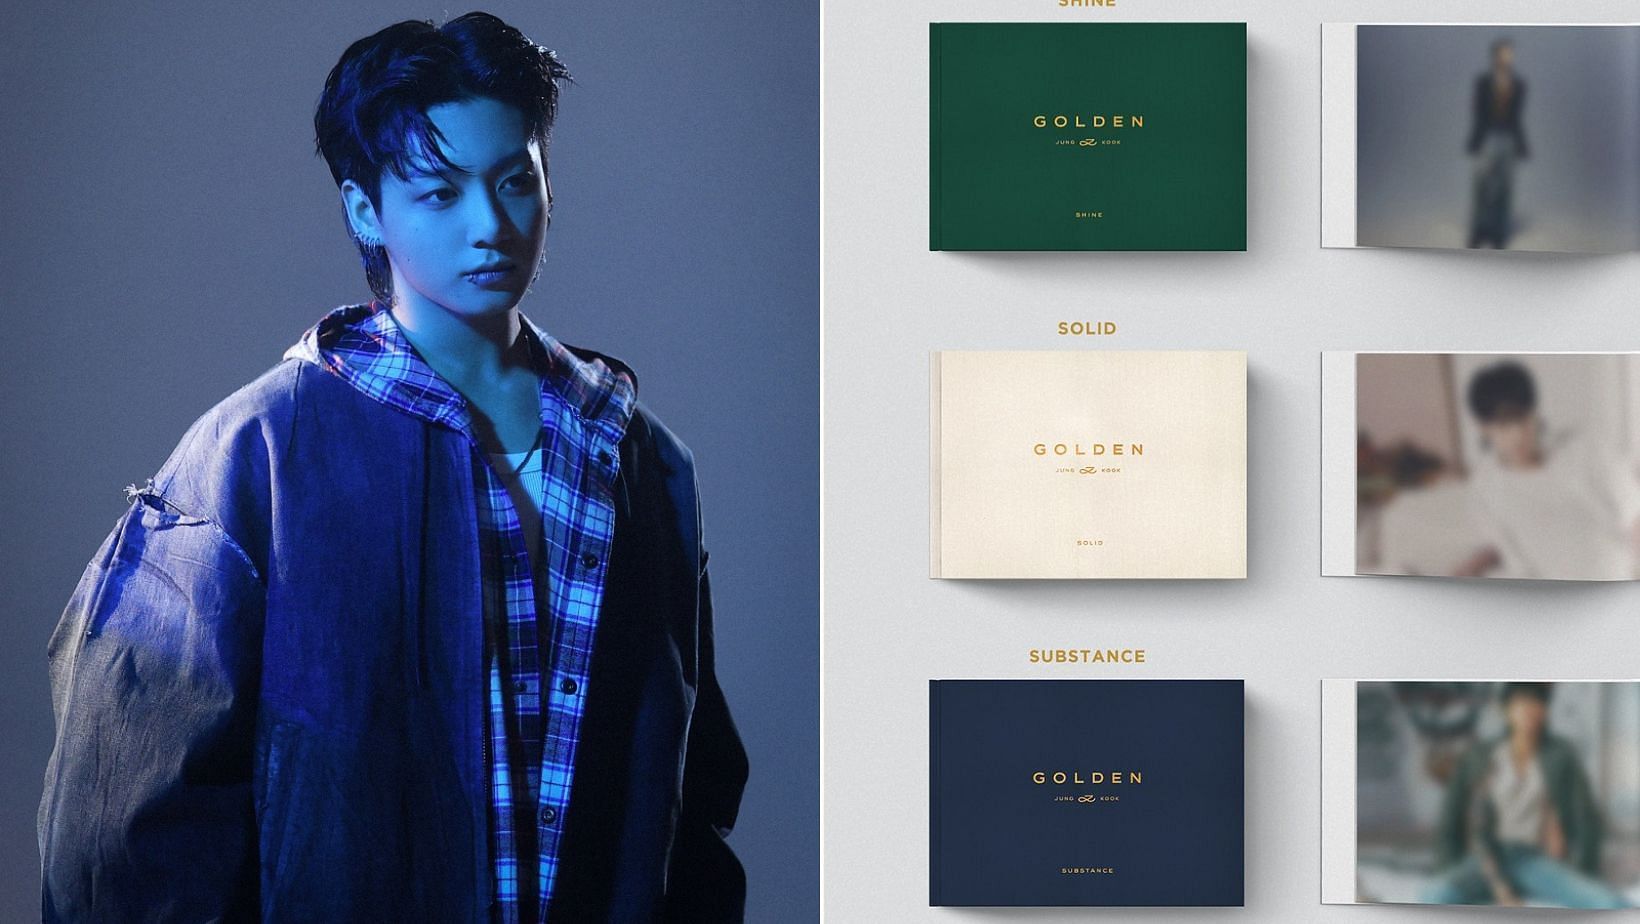 Jungkook's Solo Album 'Golden' Has a Symbolic Meaning for the BTS Member